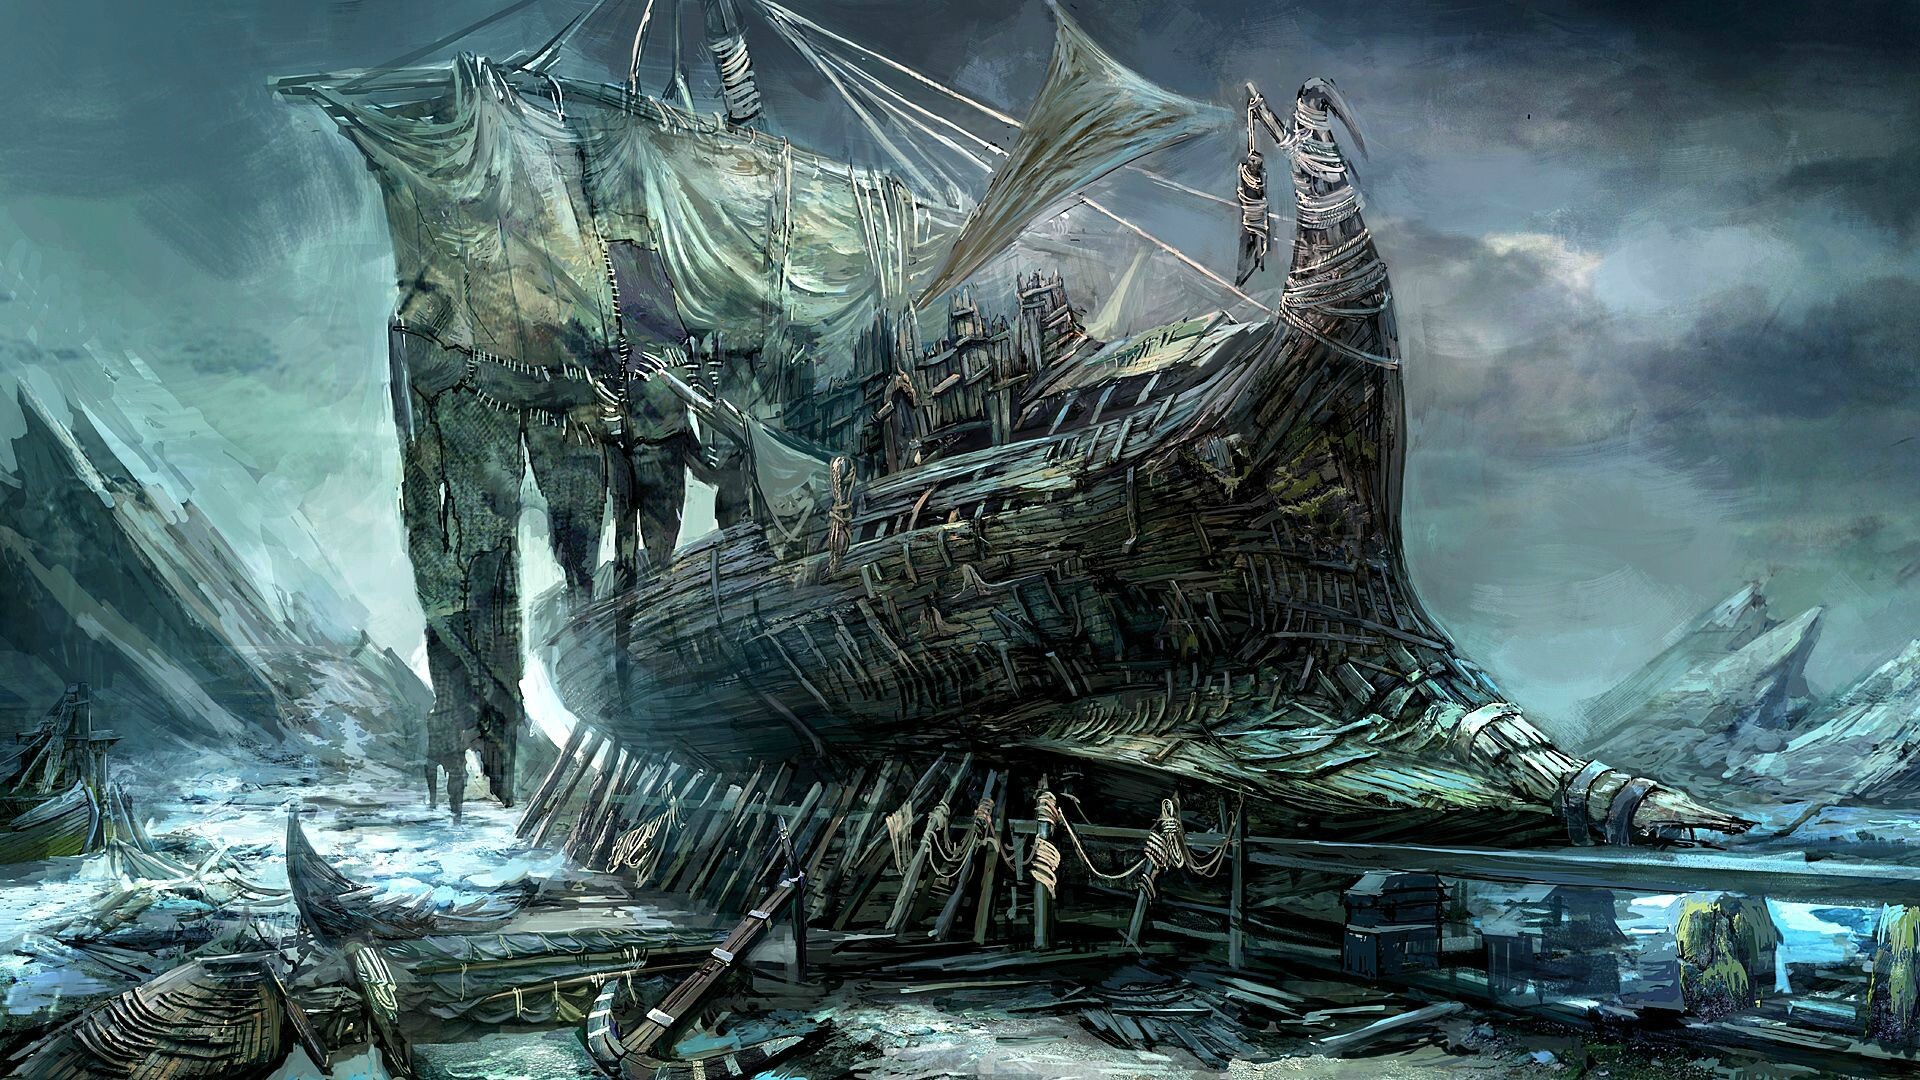 Ghost Ship: The legend that is embodied in both folklore and real life stories. 1920x1080 Full HD Wallpaper.